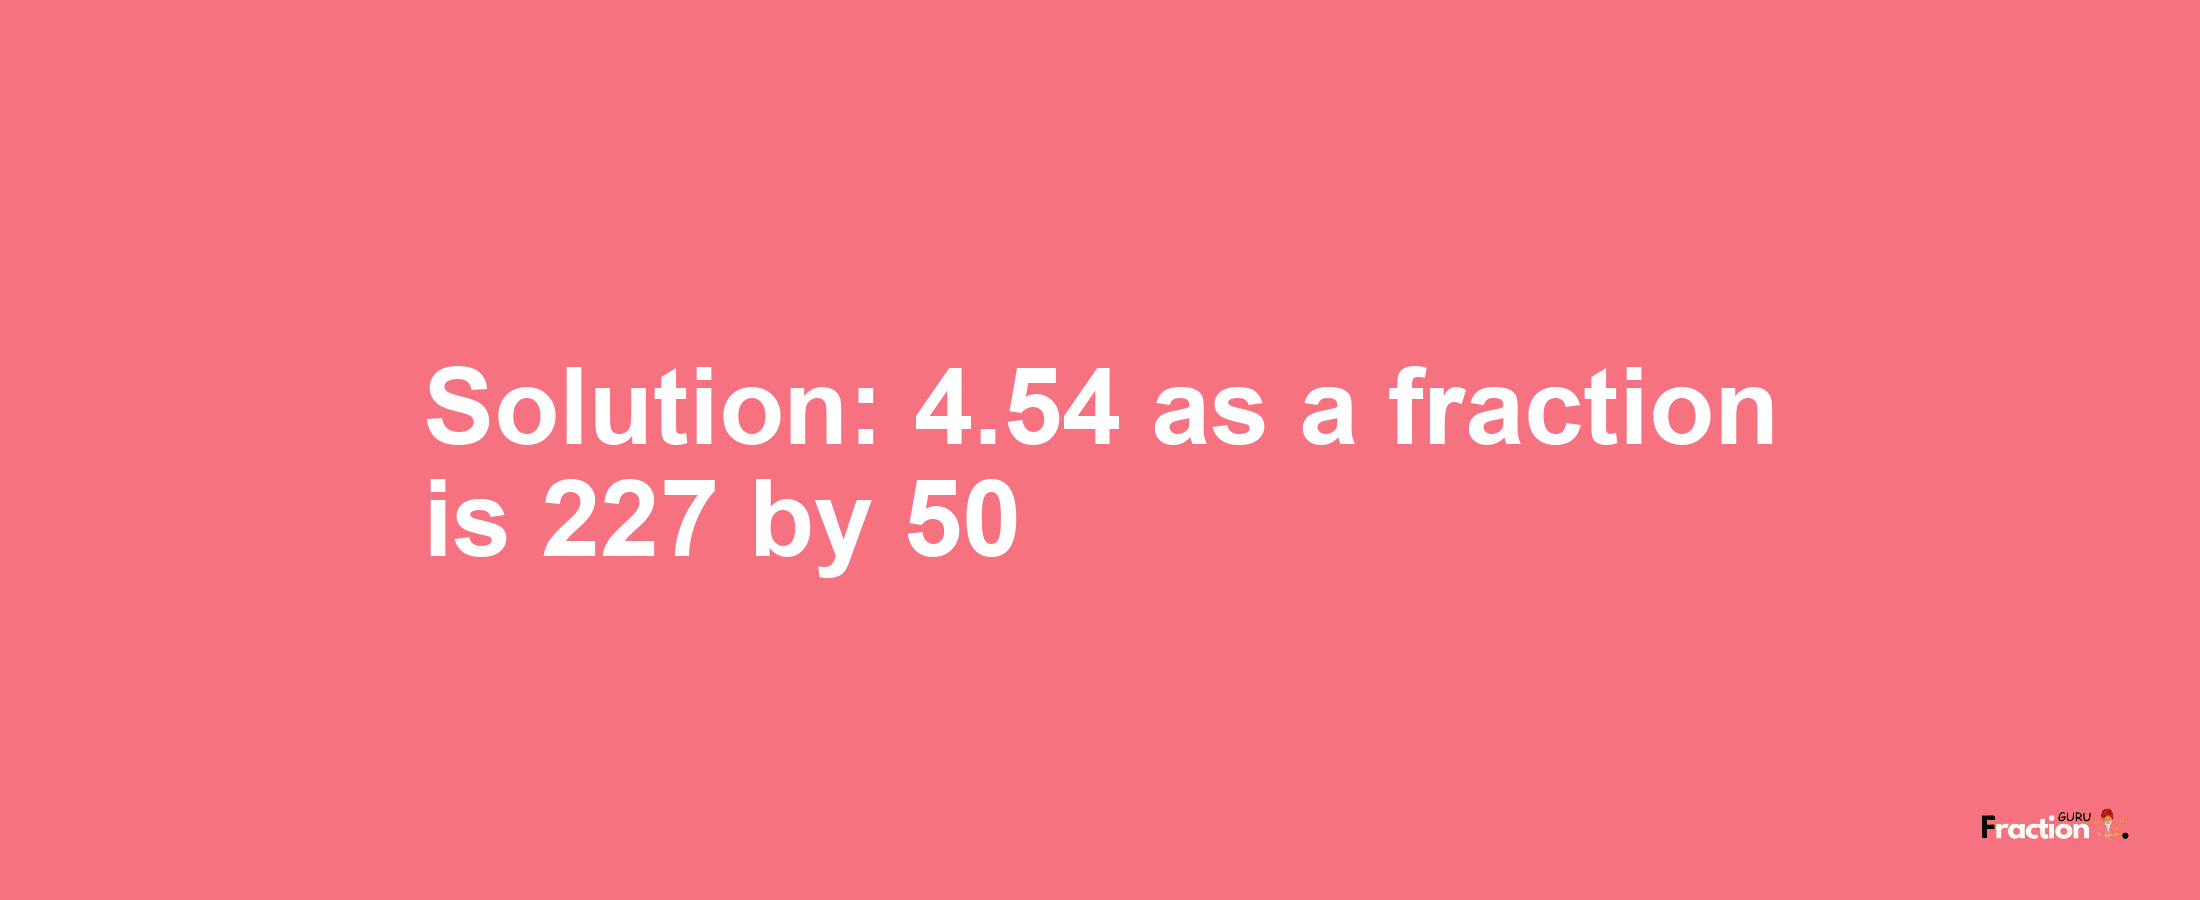 Solution:4.54 as a fraction is 227/50